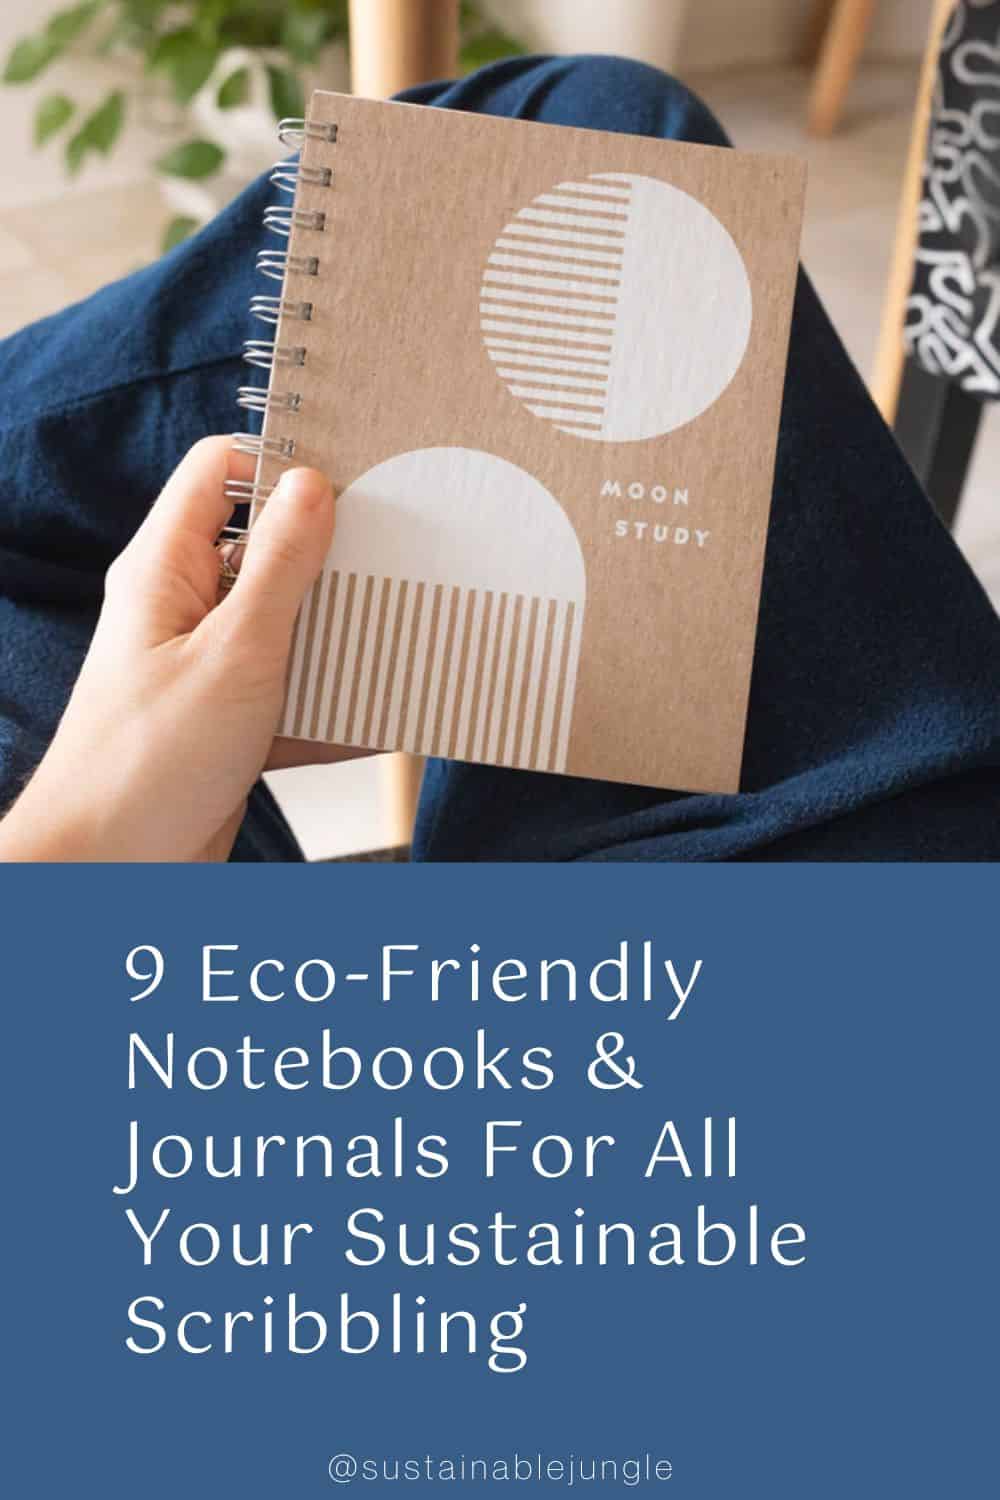 9 Eco-Friendly Notebooks & Journals For All Your Sustainable Scribbling Image by Worthwhile Paper #ecofriendlynotebooks #sustainablenotebooks #ecofriendlyspiralnotebooks #ecofriendlyjournalsandnotebooks #ecofriendlycompostitionnotebooks #bestsustainablenotebooks #sustainablejungle